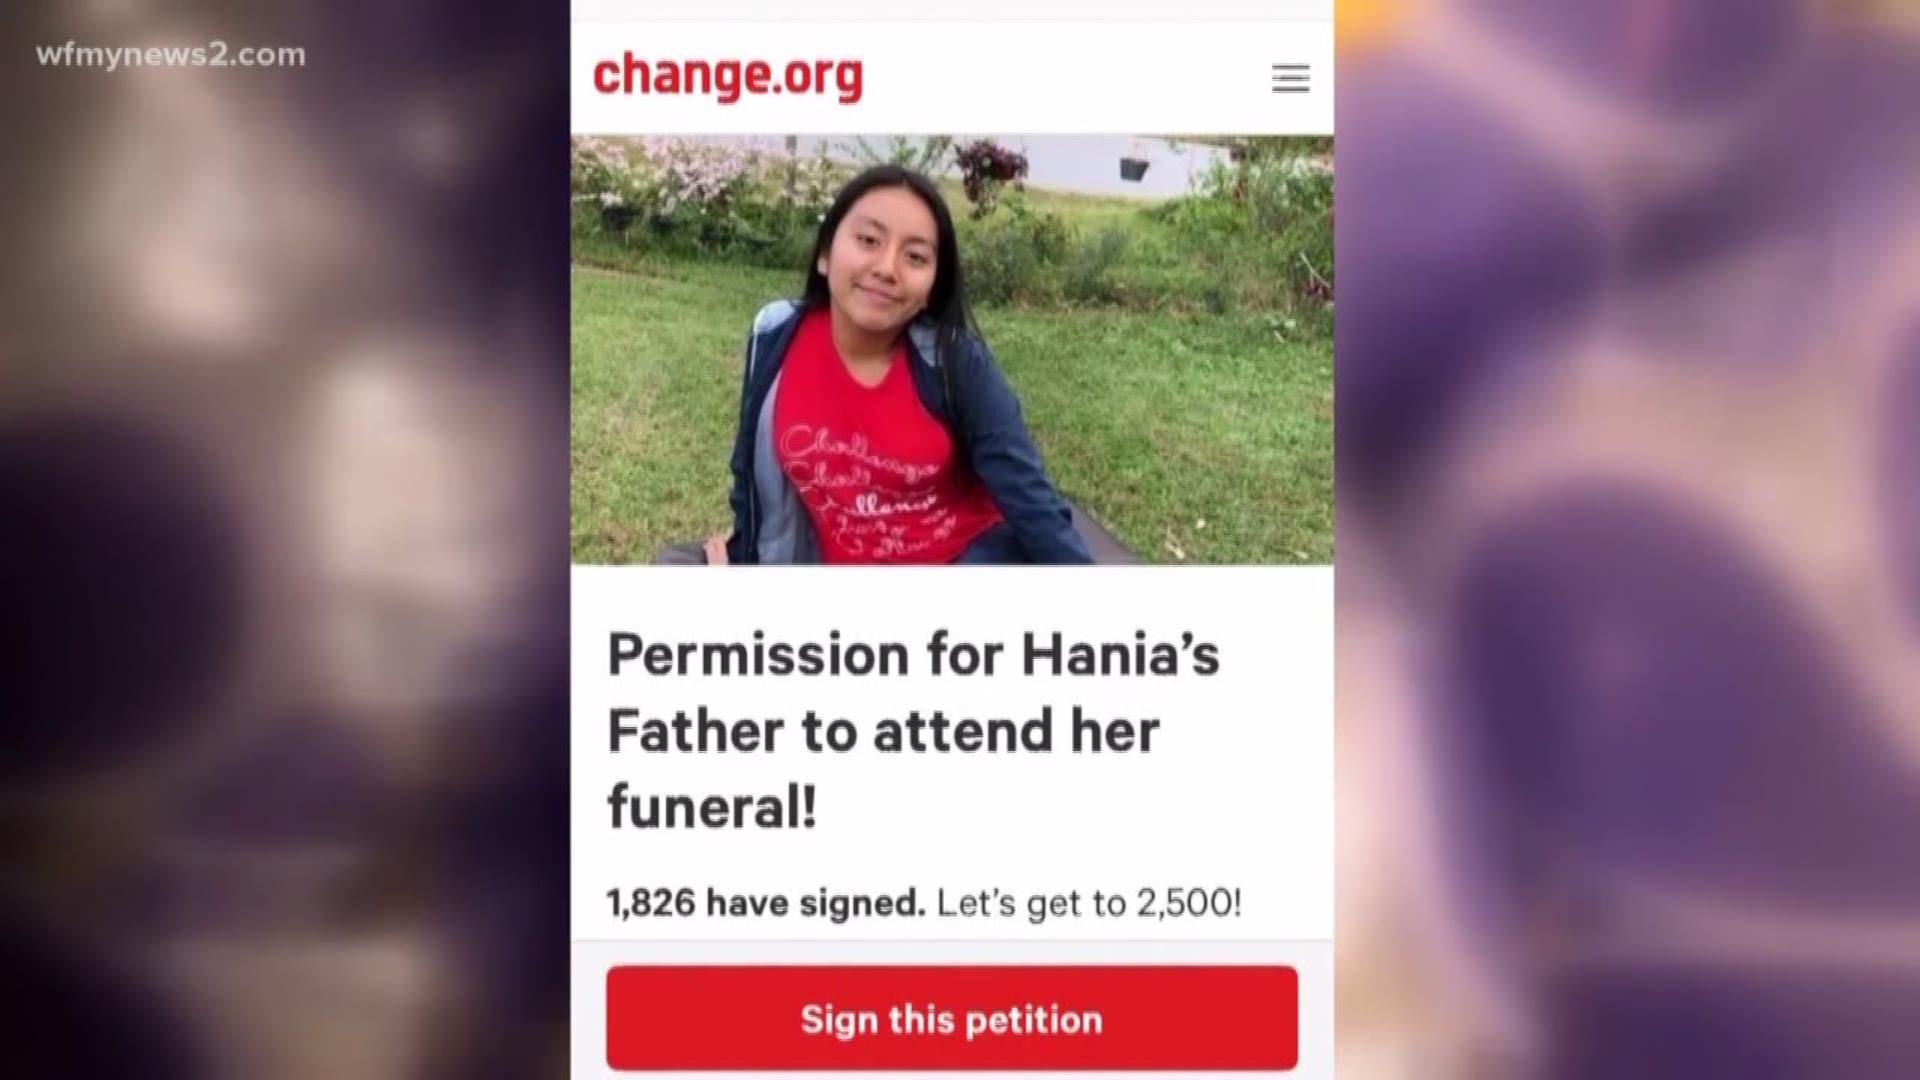 Hania Aguilar's father lives in Guatemala he would have to go through immigration services to attend his daughters funeral